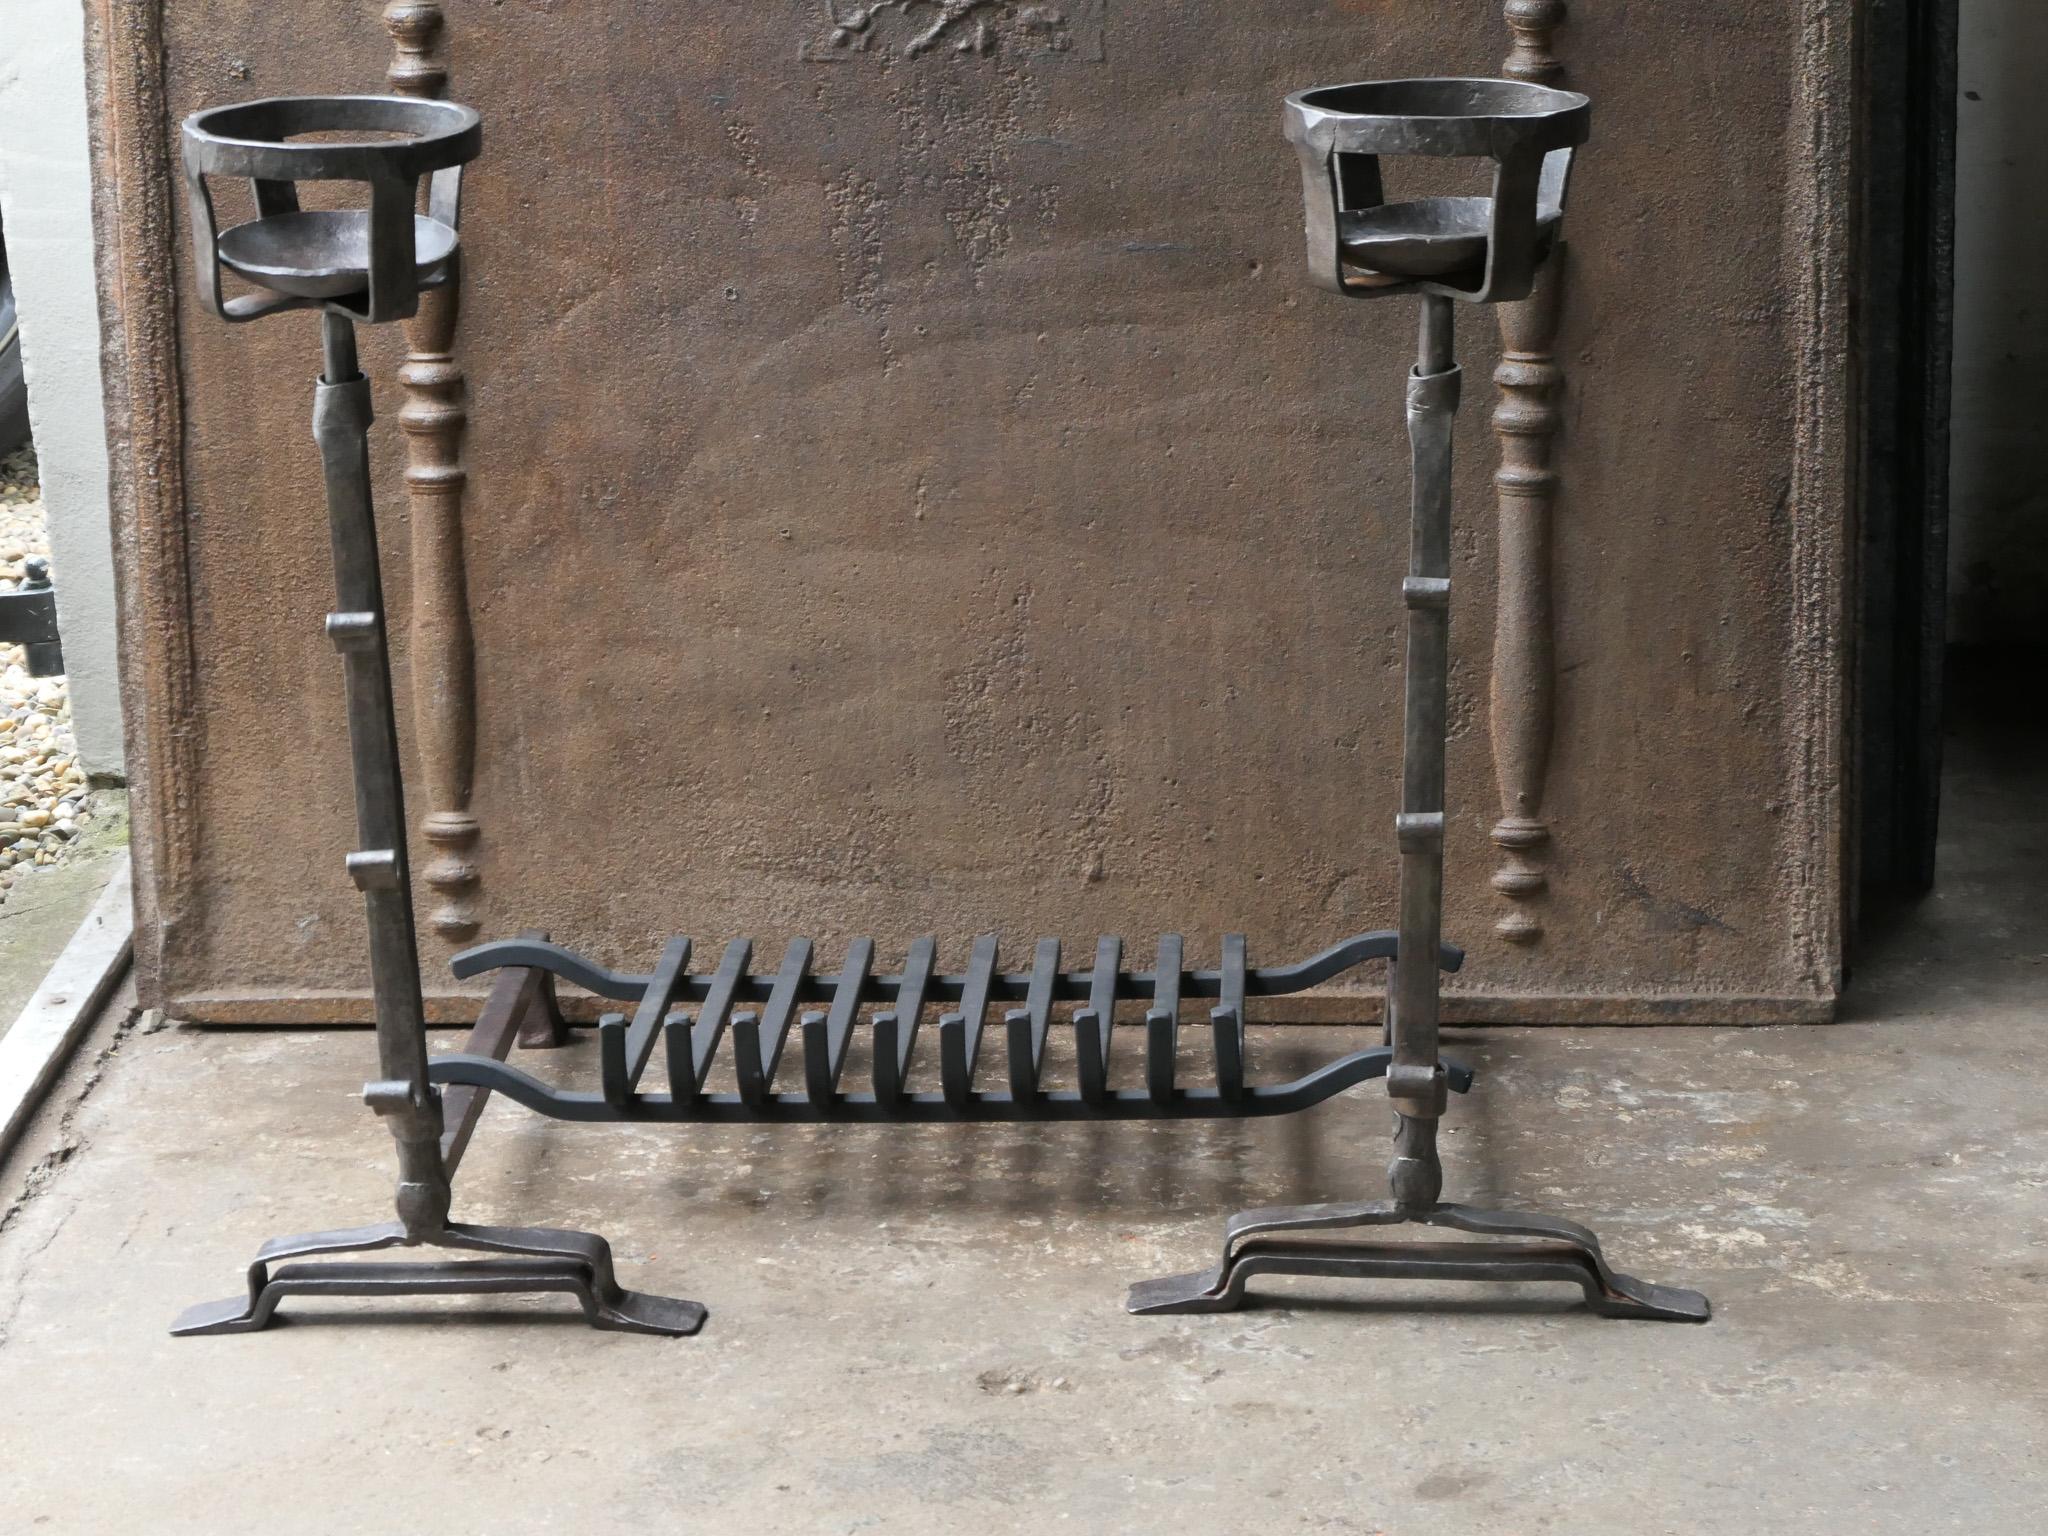 Forged Antique French Gothic Fireplace Grate or Fire Basket, 17th - 18th Century For Sale